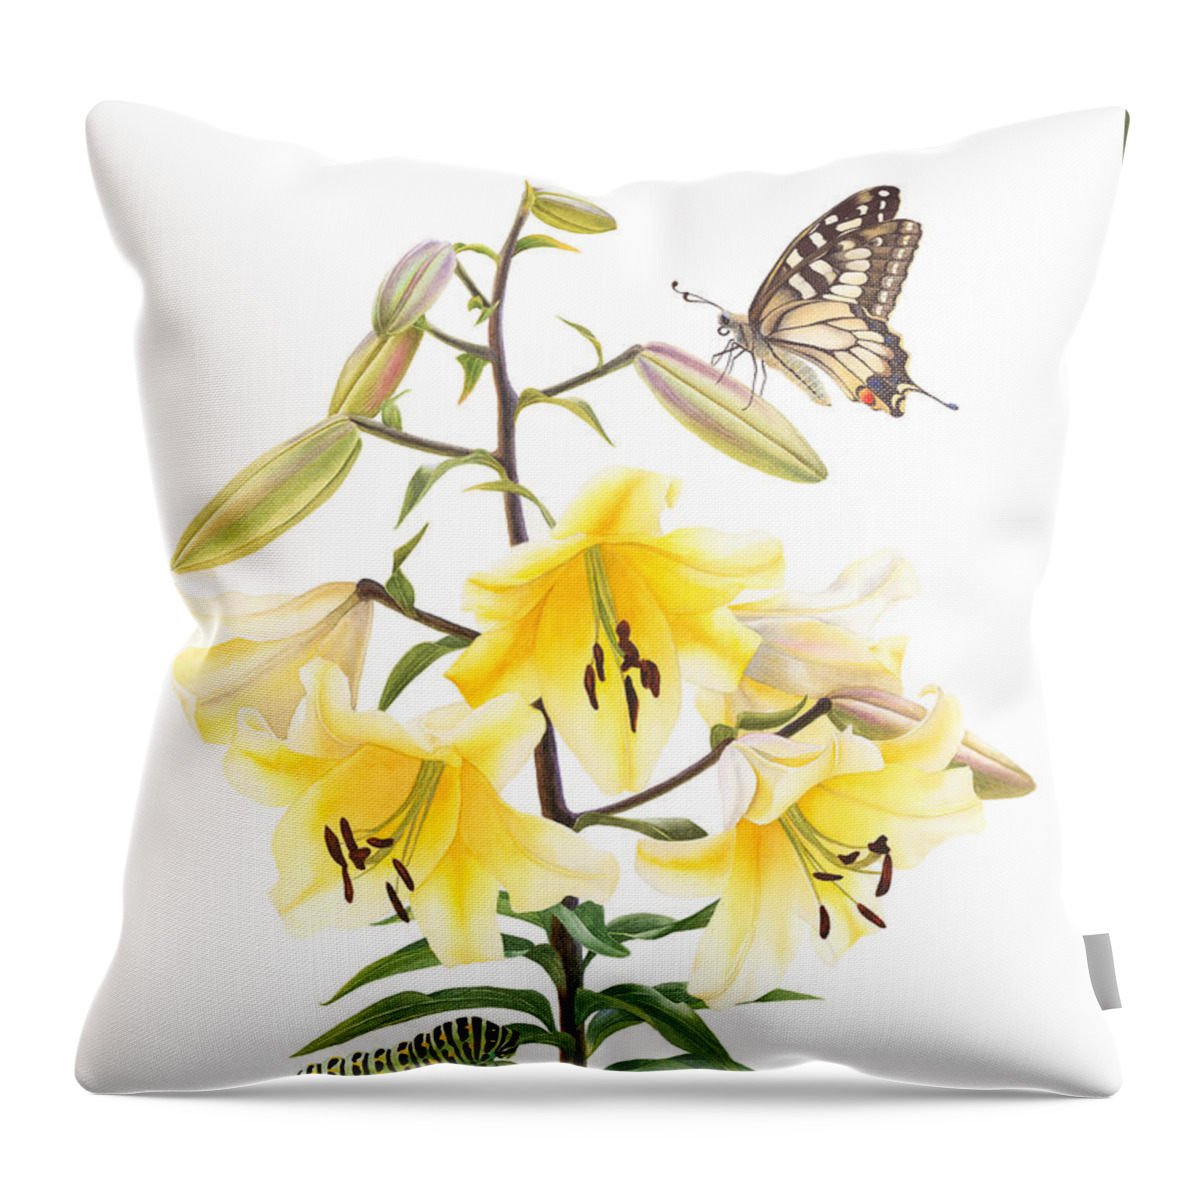 Esperoart Throw Pillow featuring the painting Big Brother Lily by Espero Art